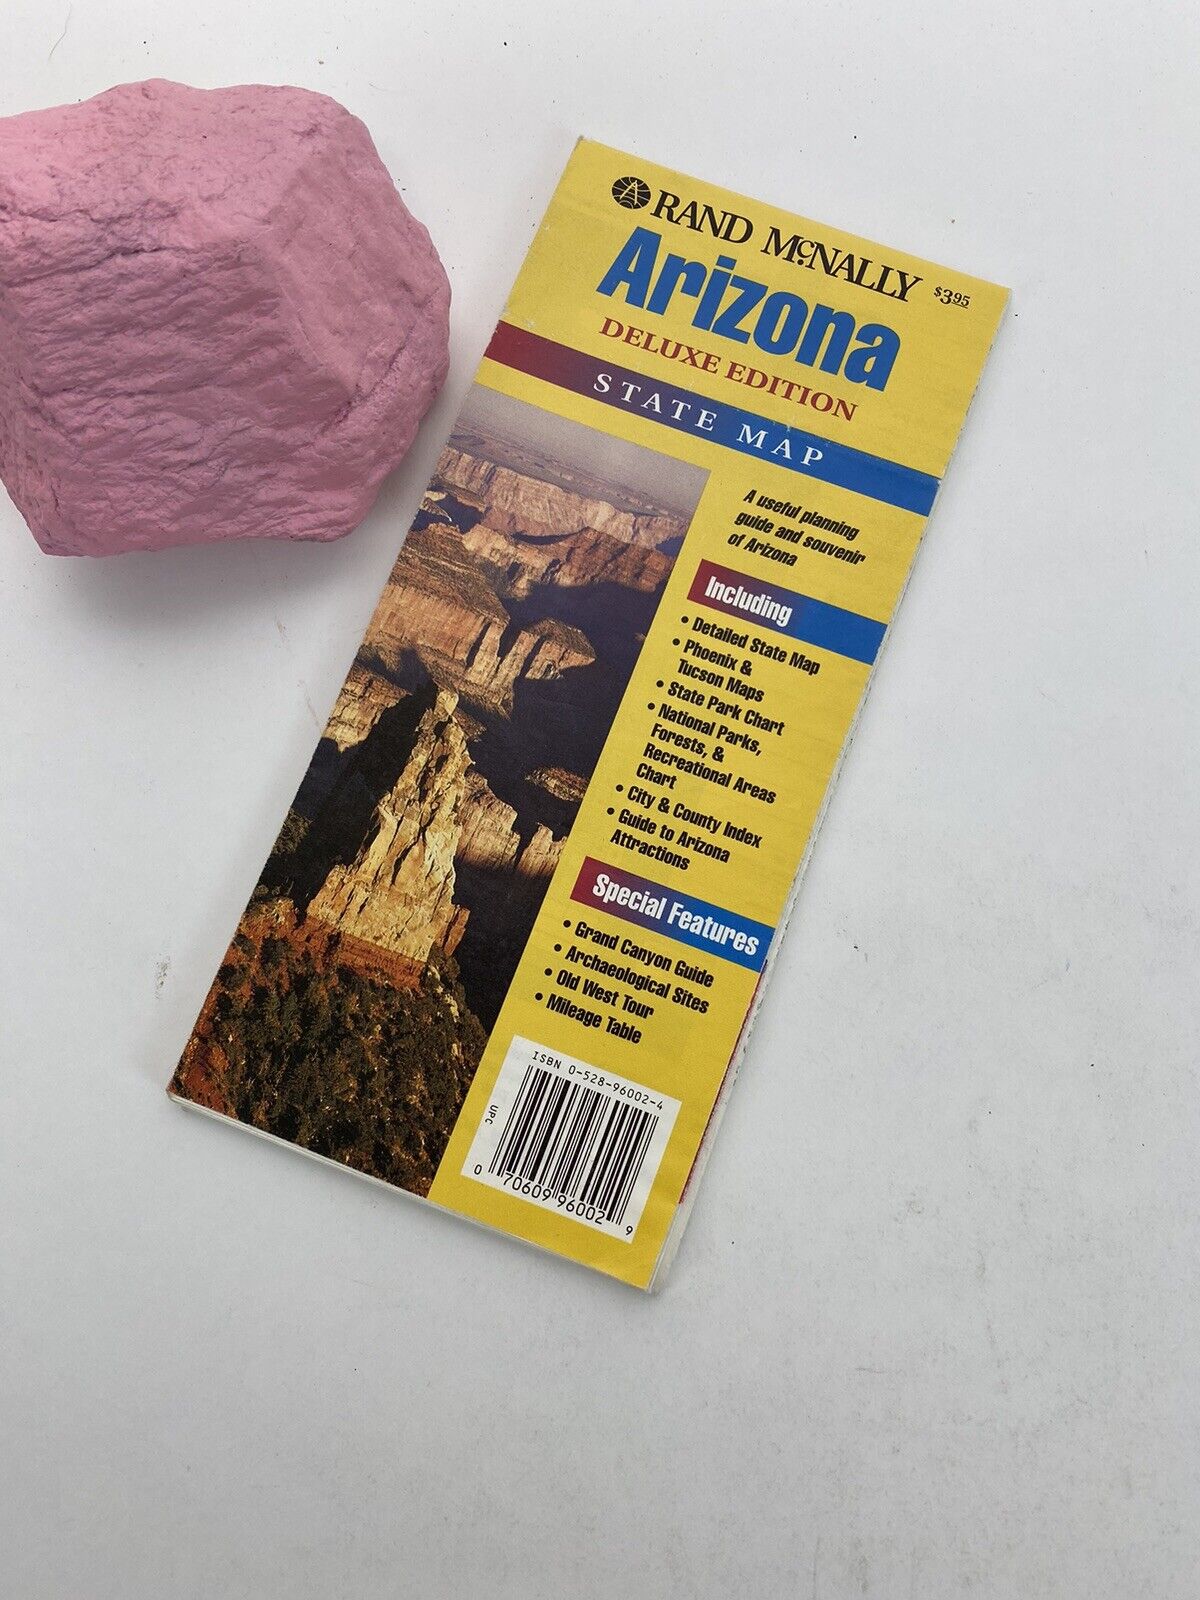 1994 ARIZONA STATE MAP DELUXE Edition  RAND MCNALLY 